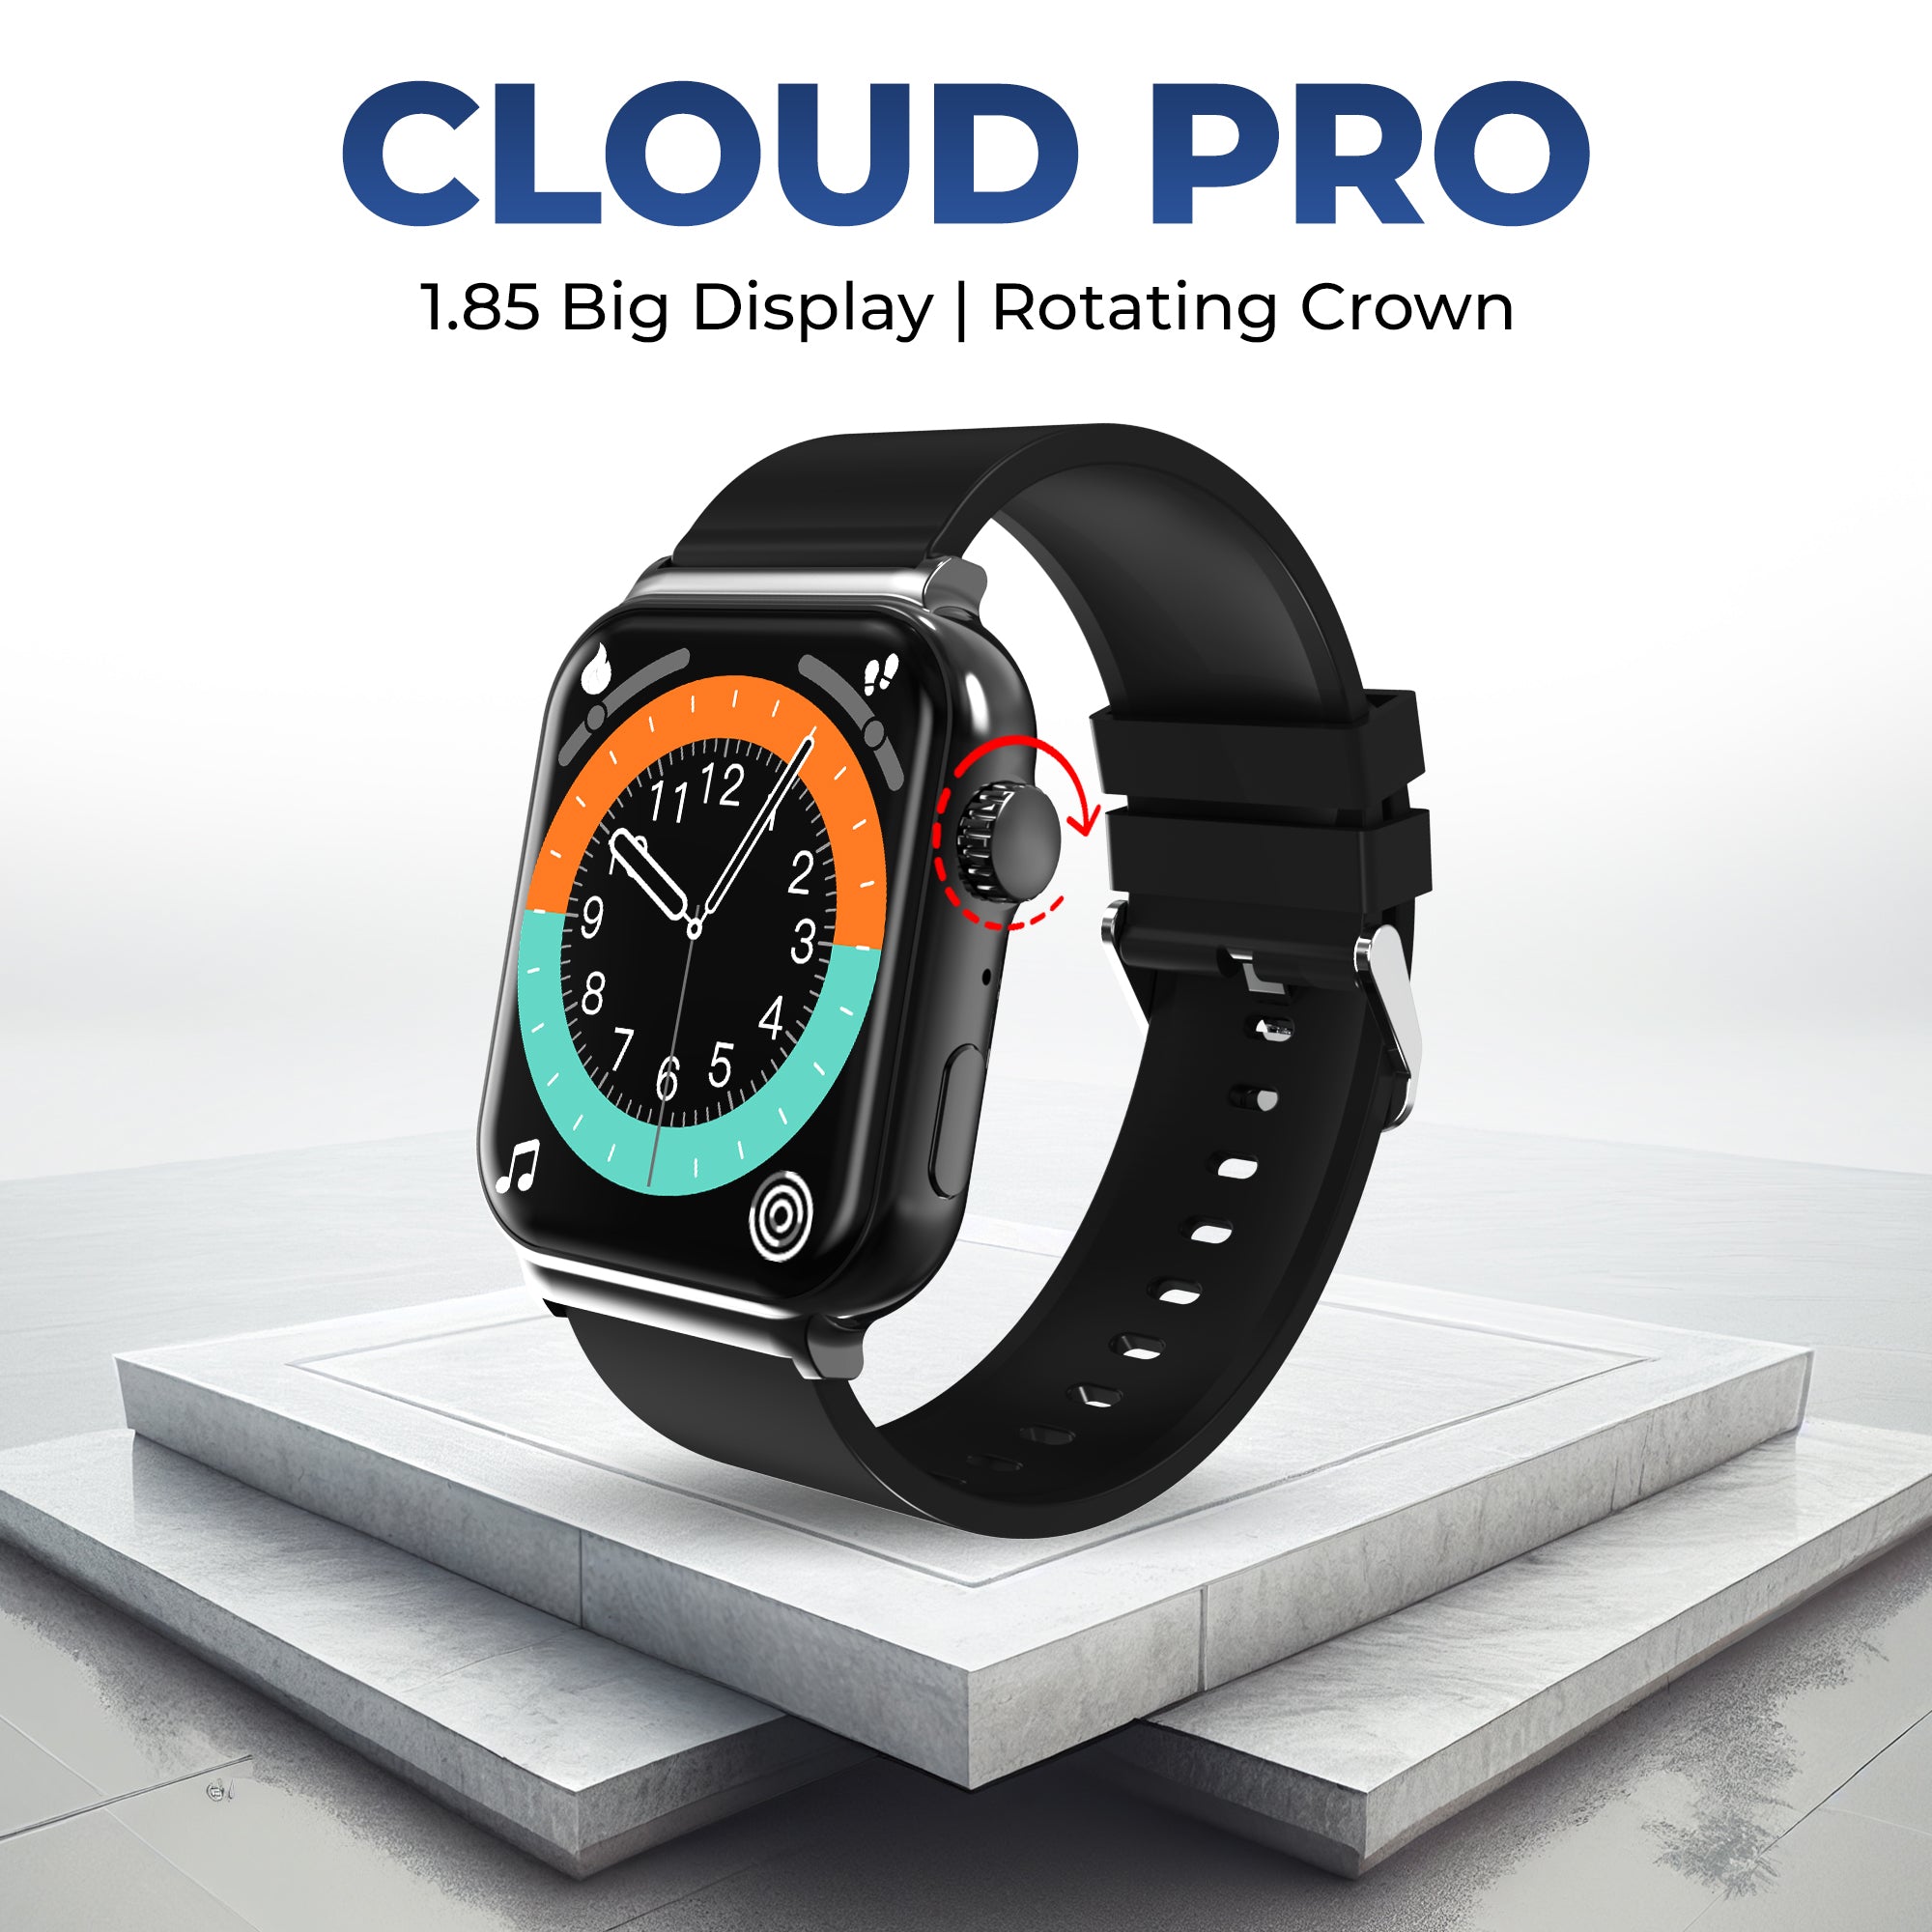 Gizmore Cloud Pro 1.85 BT Calling Smartwatch IPS Display, Rotating Crown